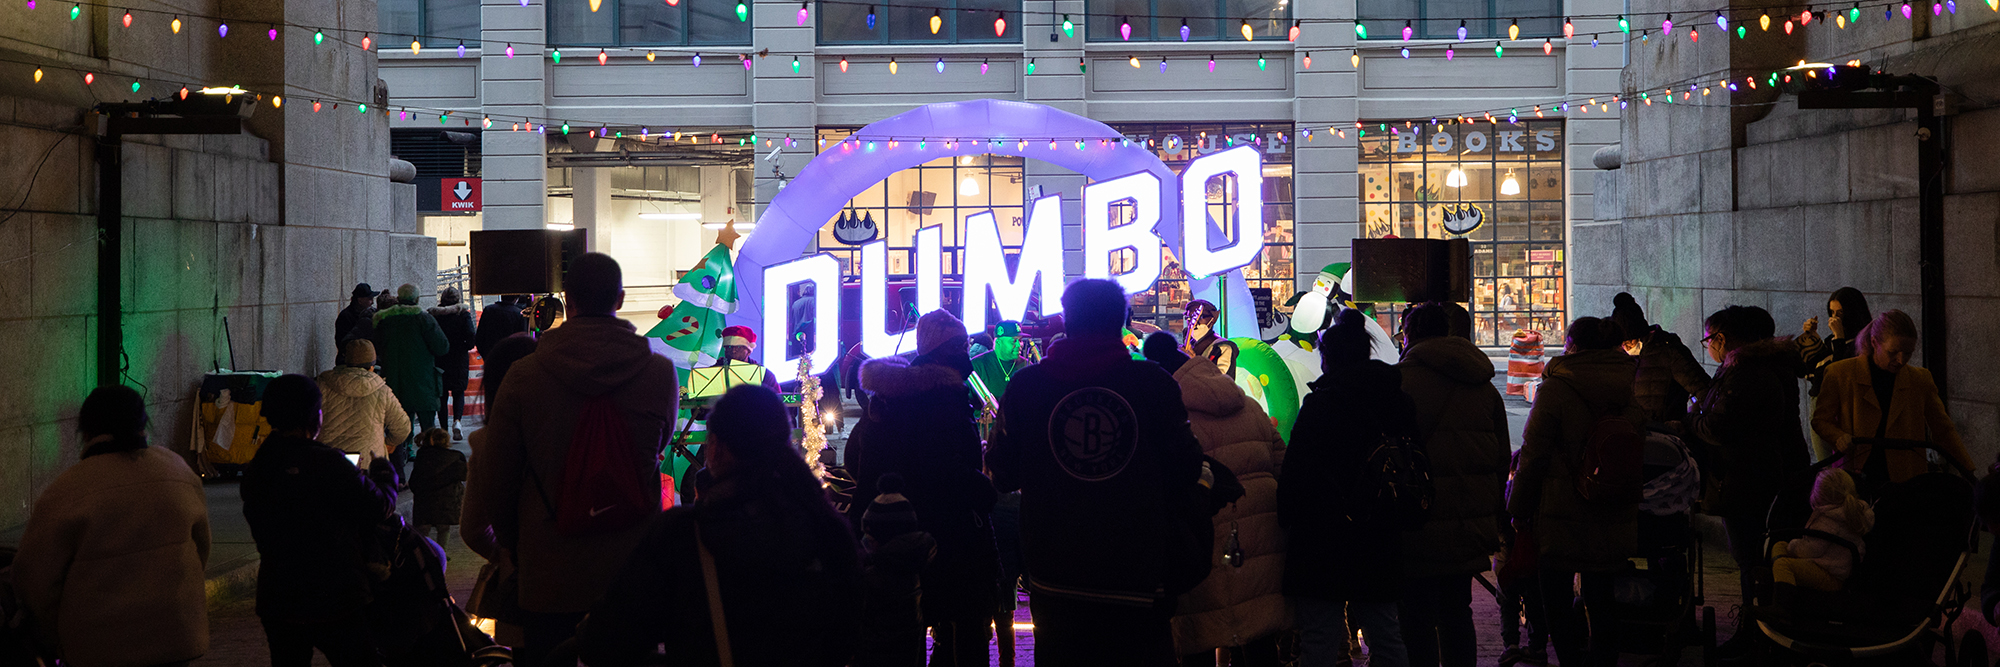 NYC DUMBO Improvement District - Community + Your Place For the Holidays - Dumbo Reflector Holiday Give Back